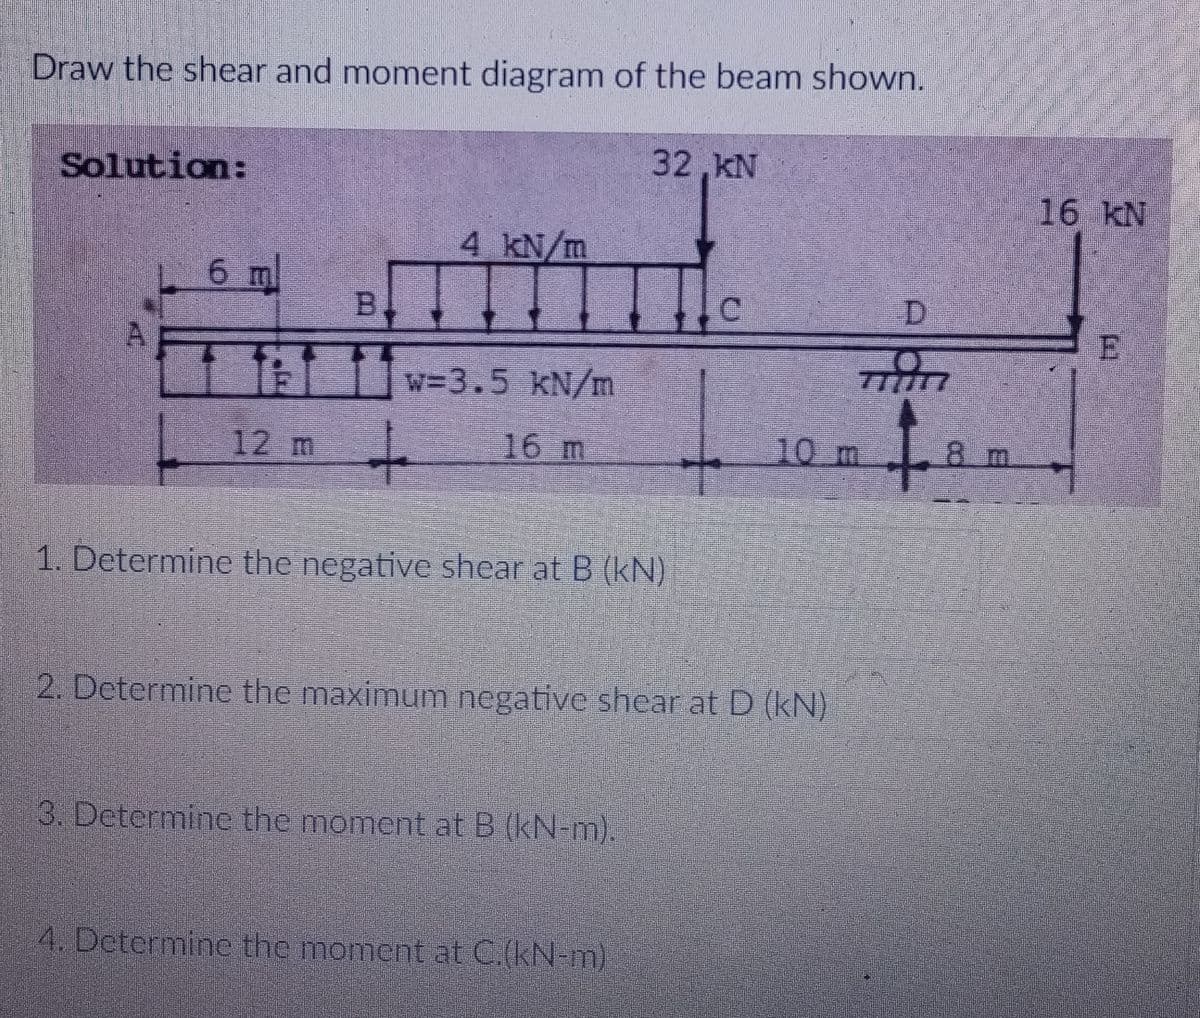 Draw the shear and moment diagram of the beam shown.
32,kN
Solution:
16 kN
4 kN/m
6 m
B.
D.
TEL w=3.5 KN/m
777717
12 m
16 m
10 m
8 m
1. Determine the negative shear at B (kN)
2. Determine the maximum negative shear at D (kN)
3. Determine the moment at B (kN-m).
4. Determine the moment at C.(kN-m)
